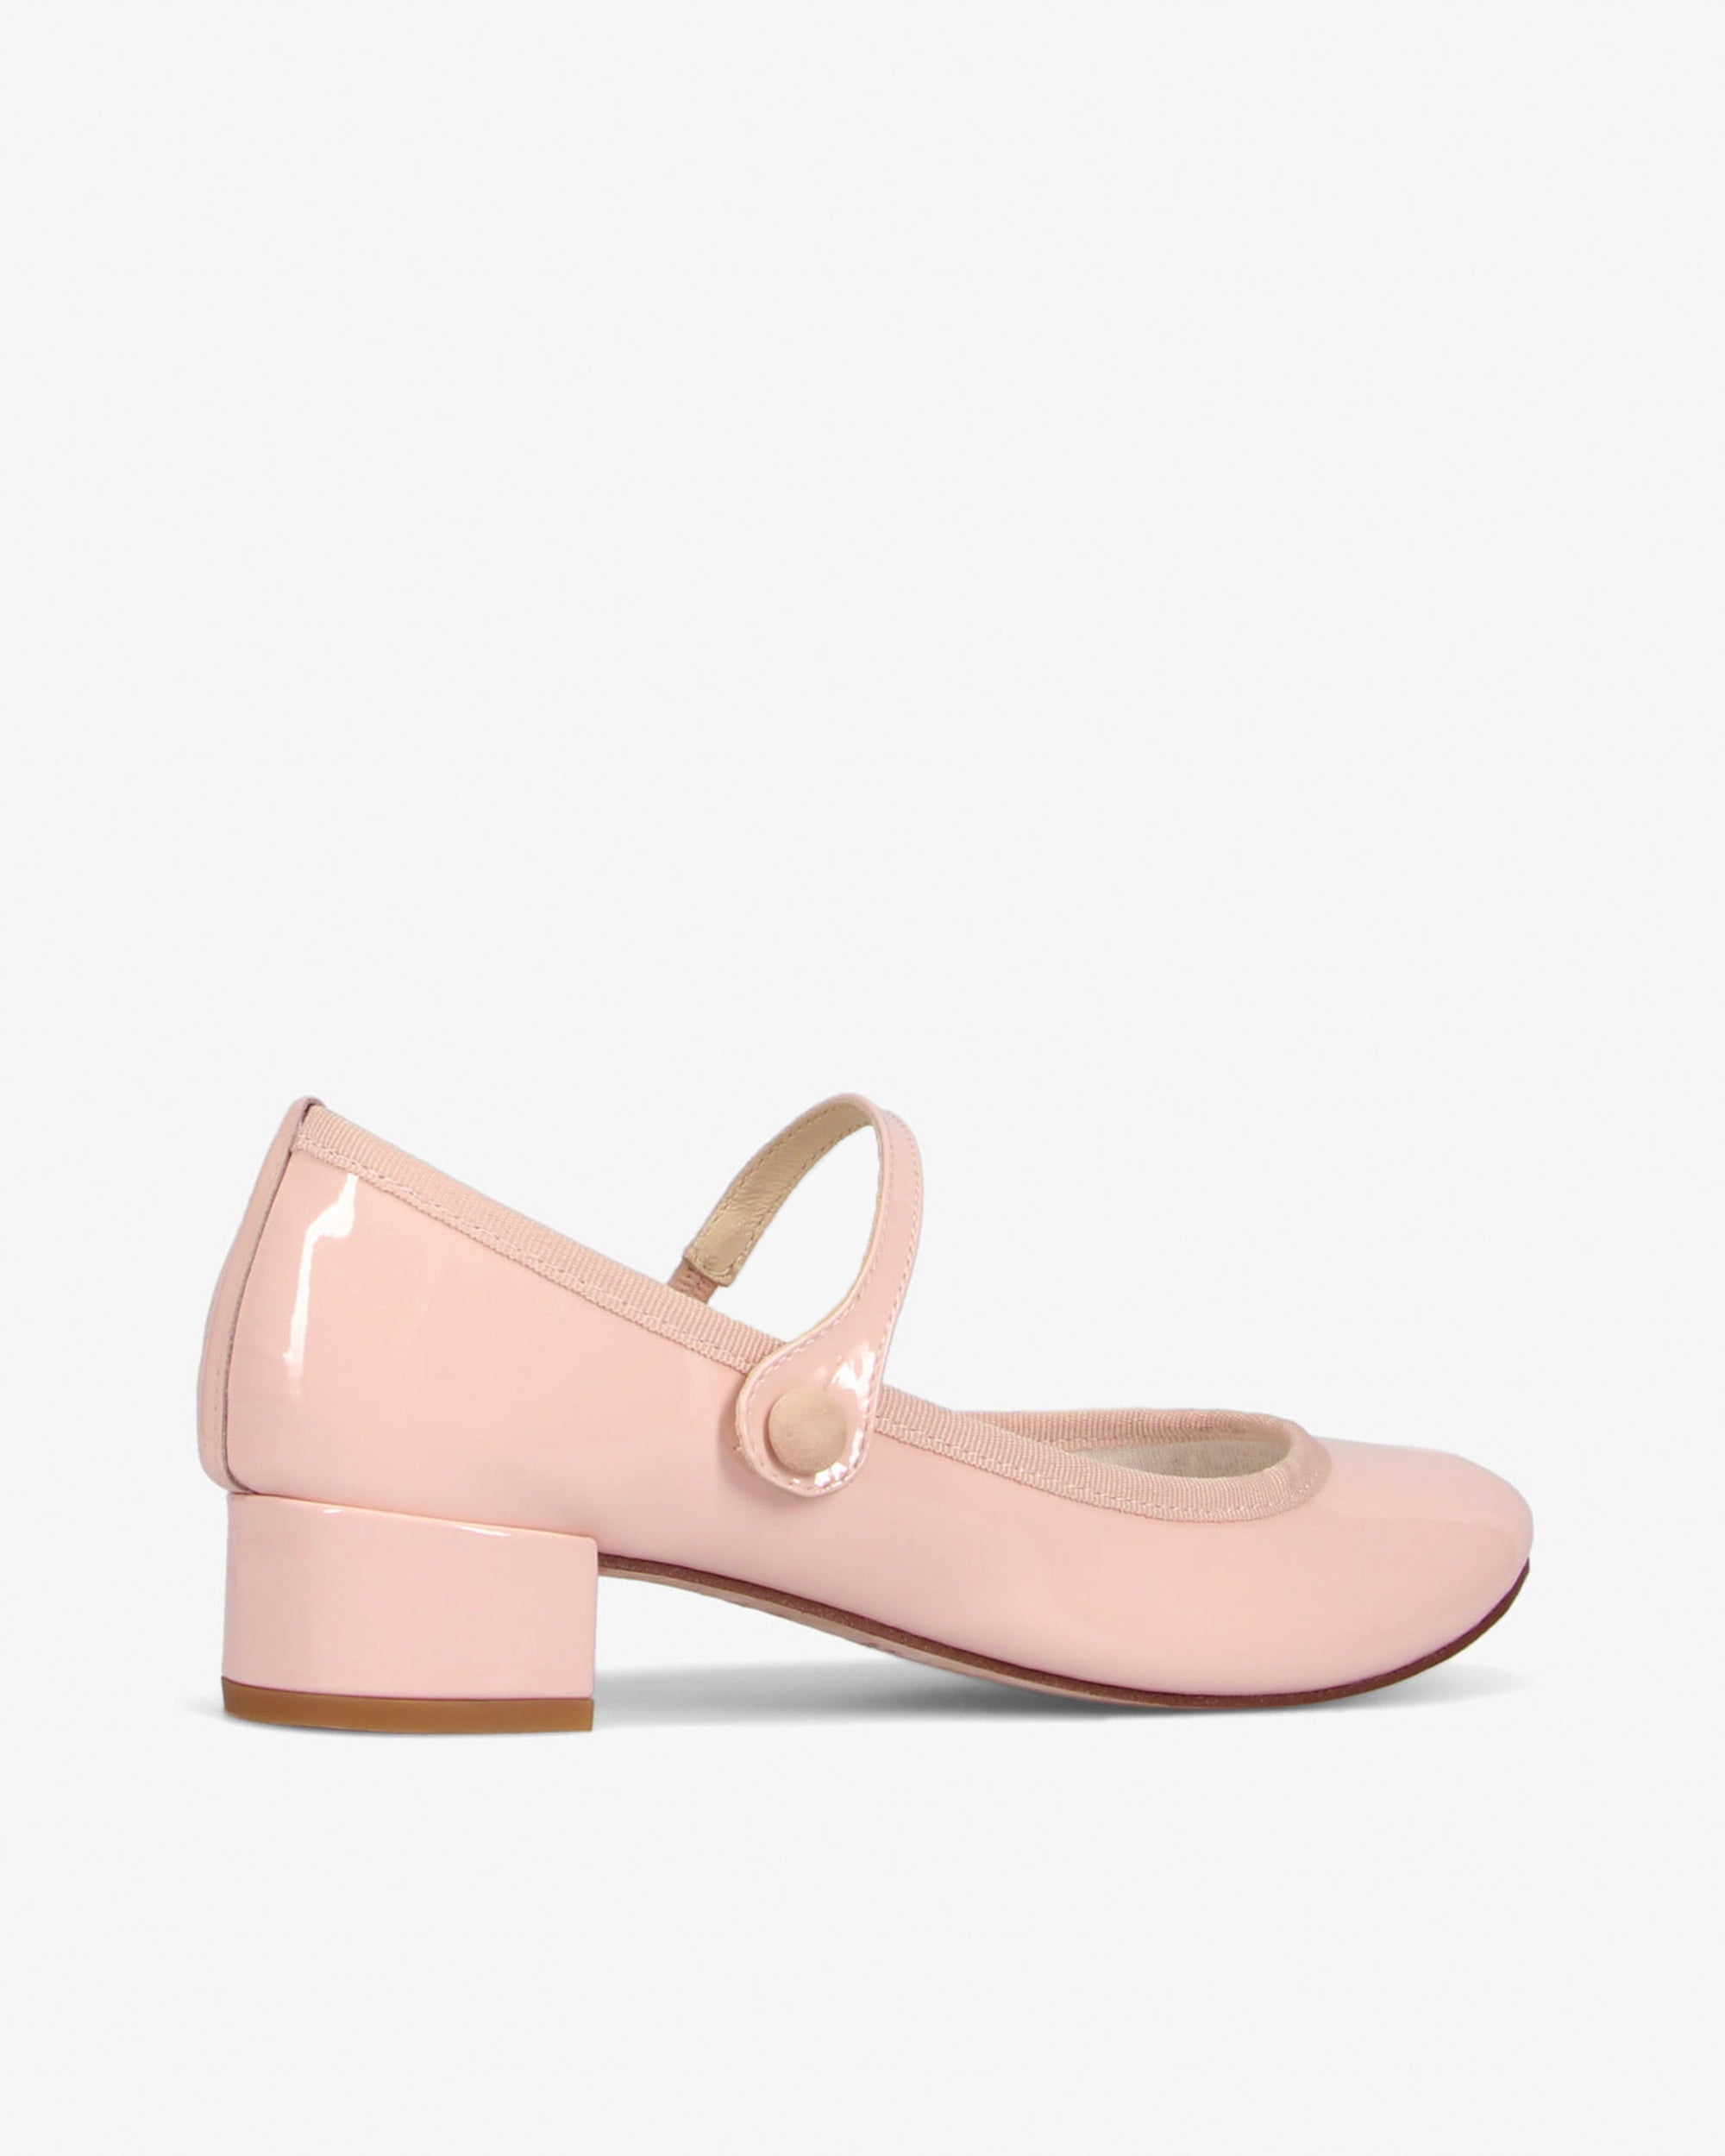 Repetto | Babies